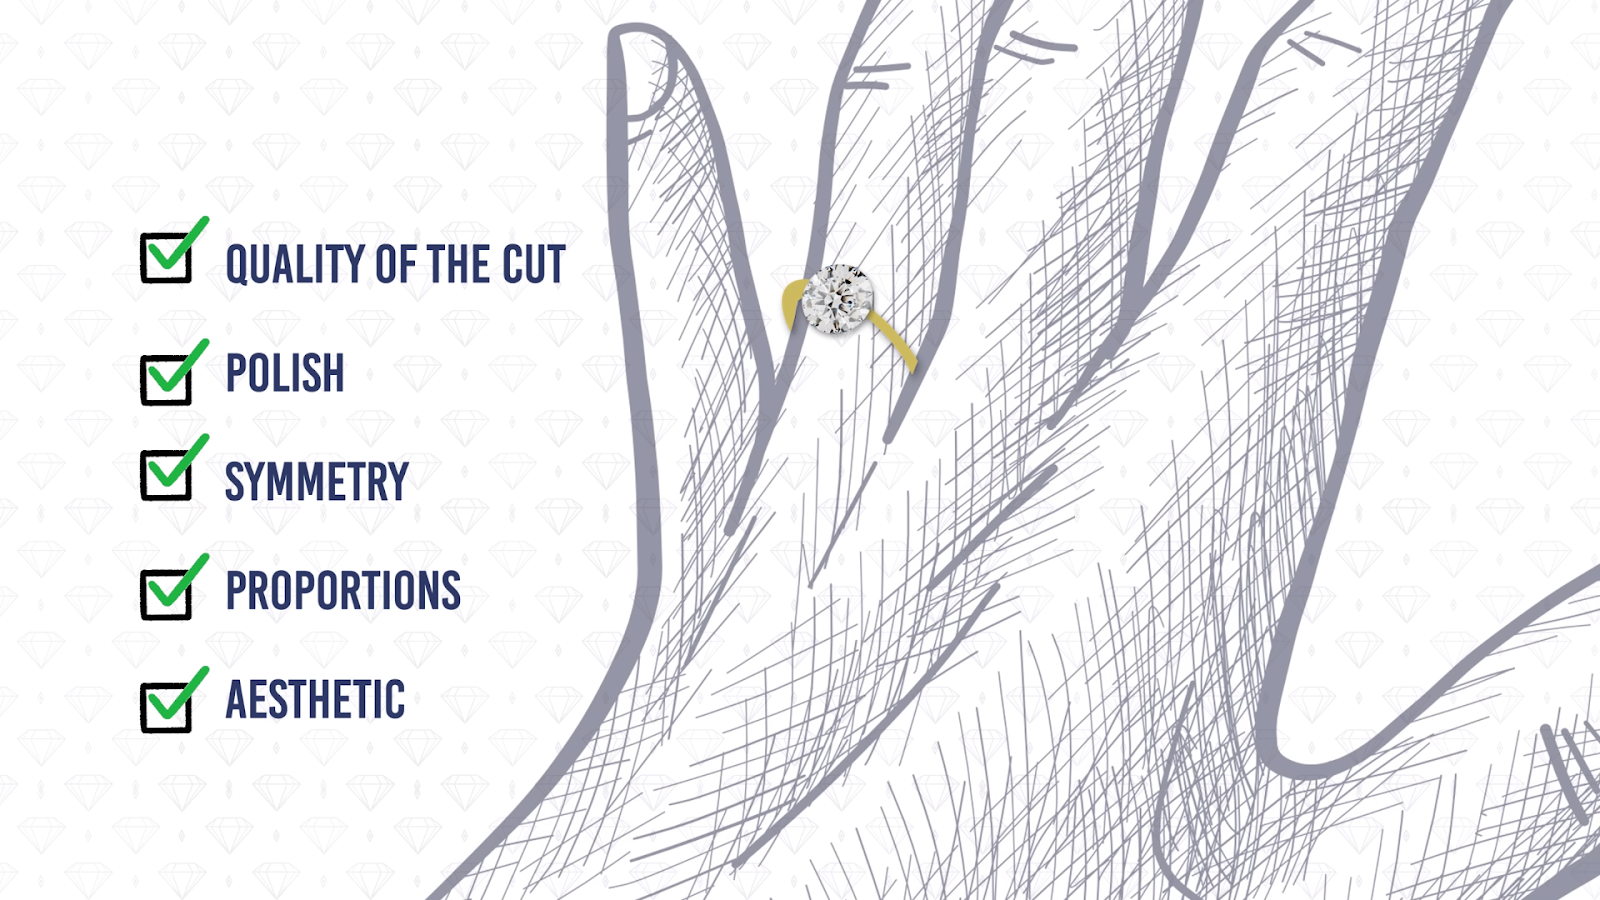 Considerations when evaluating the cut of a diamond